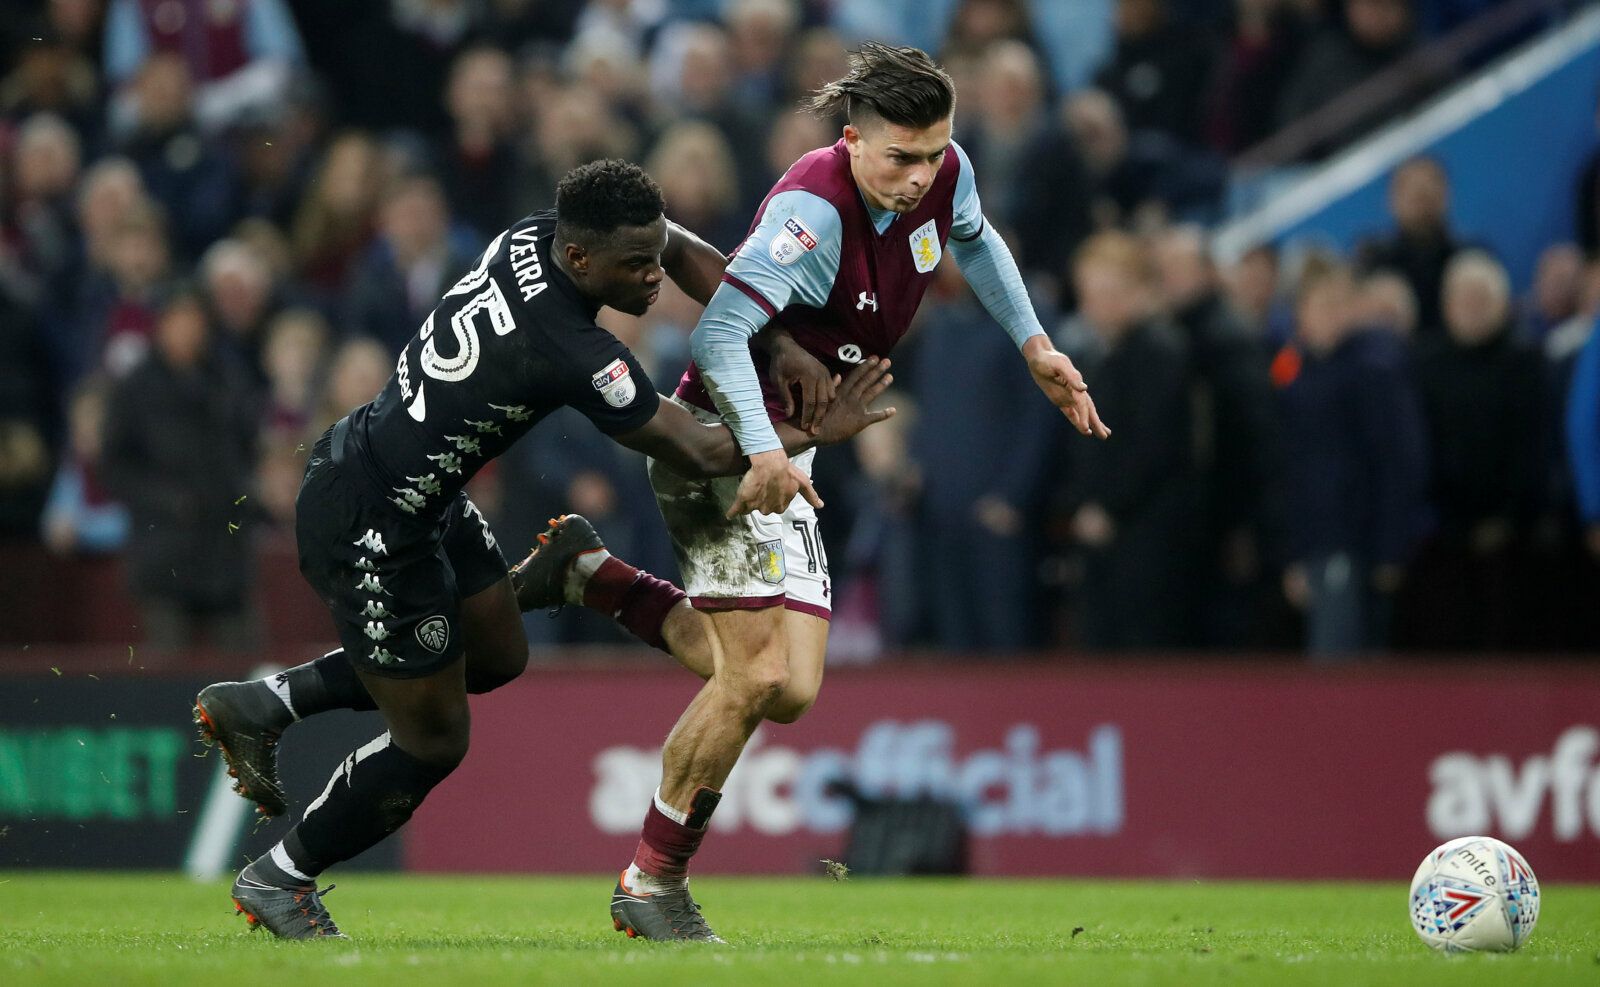 Soccer Football - Championship - Aston Villa vs Leeds United - Villa Park, Birmingham, Britain - April 13, 2018   Aston Villa's Jack Grealish in action with Leeds United's Ronaldo Vieira   Action Images/Carl Recine    EDITORIAL USE ONLY. No use with unauthorized audio, video, data, fixture lists, club/league logos or 